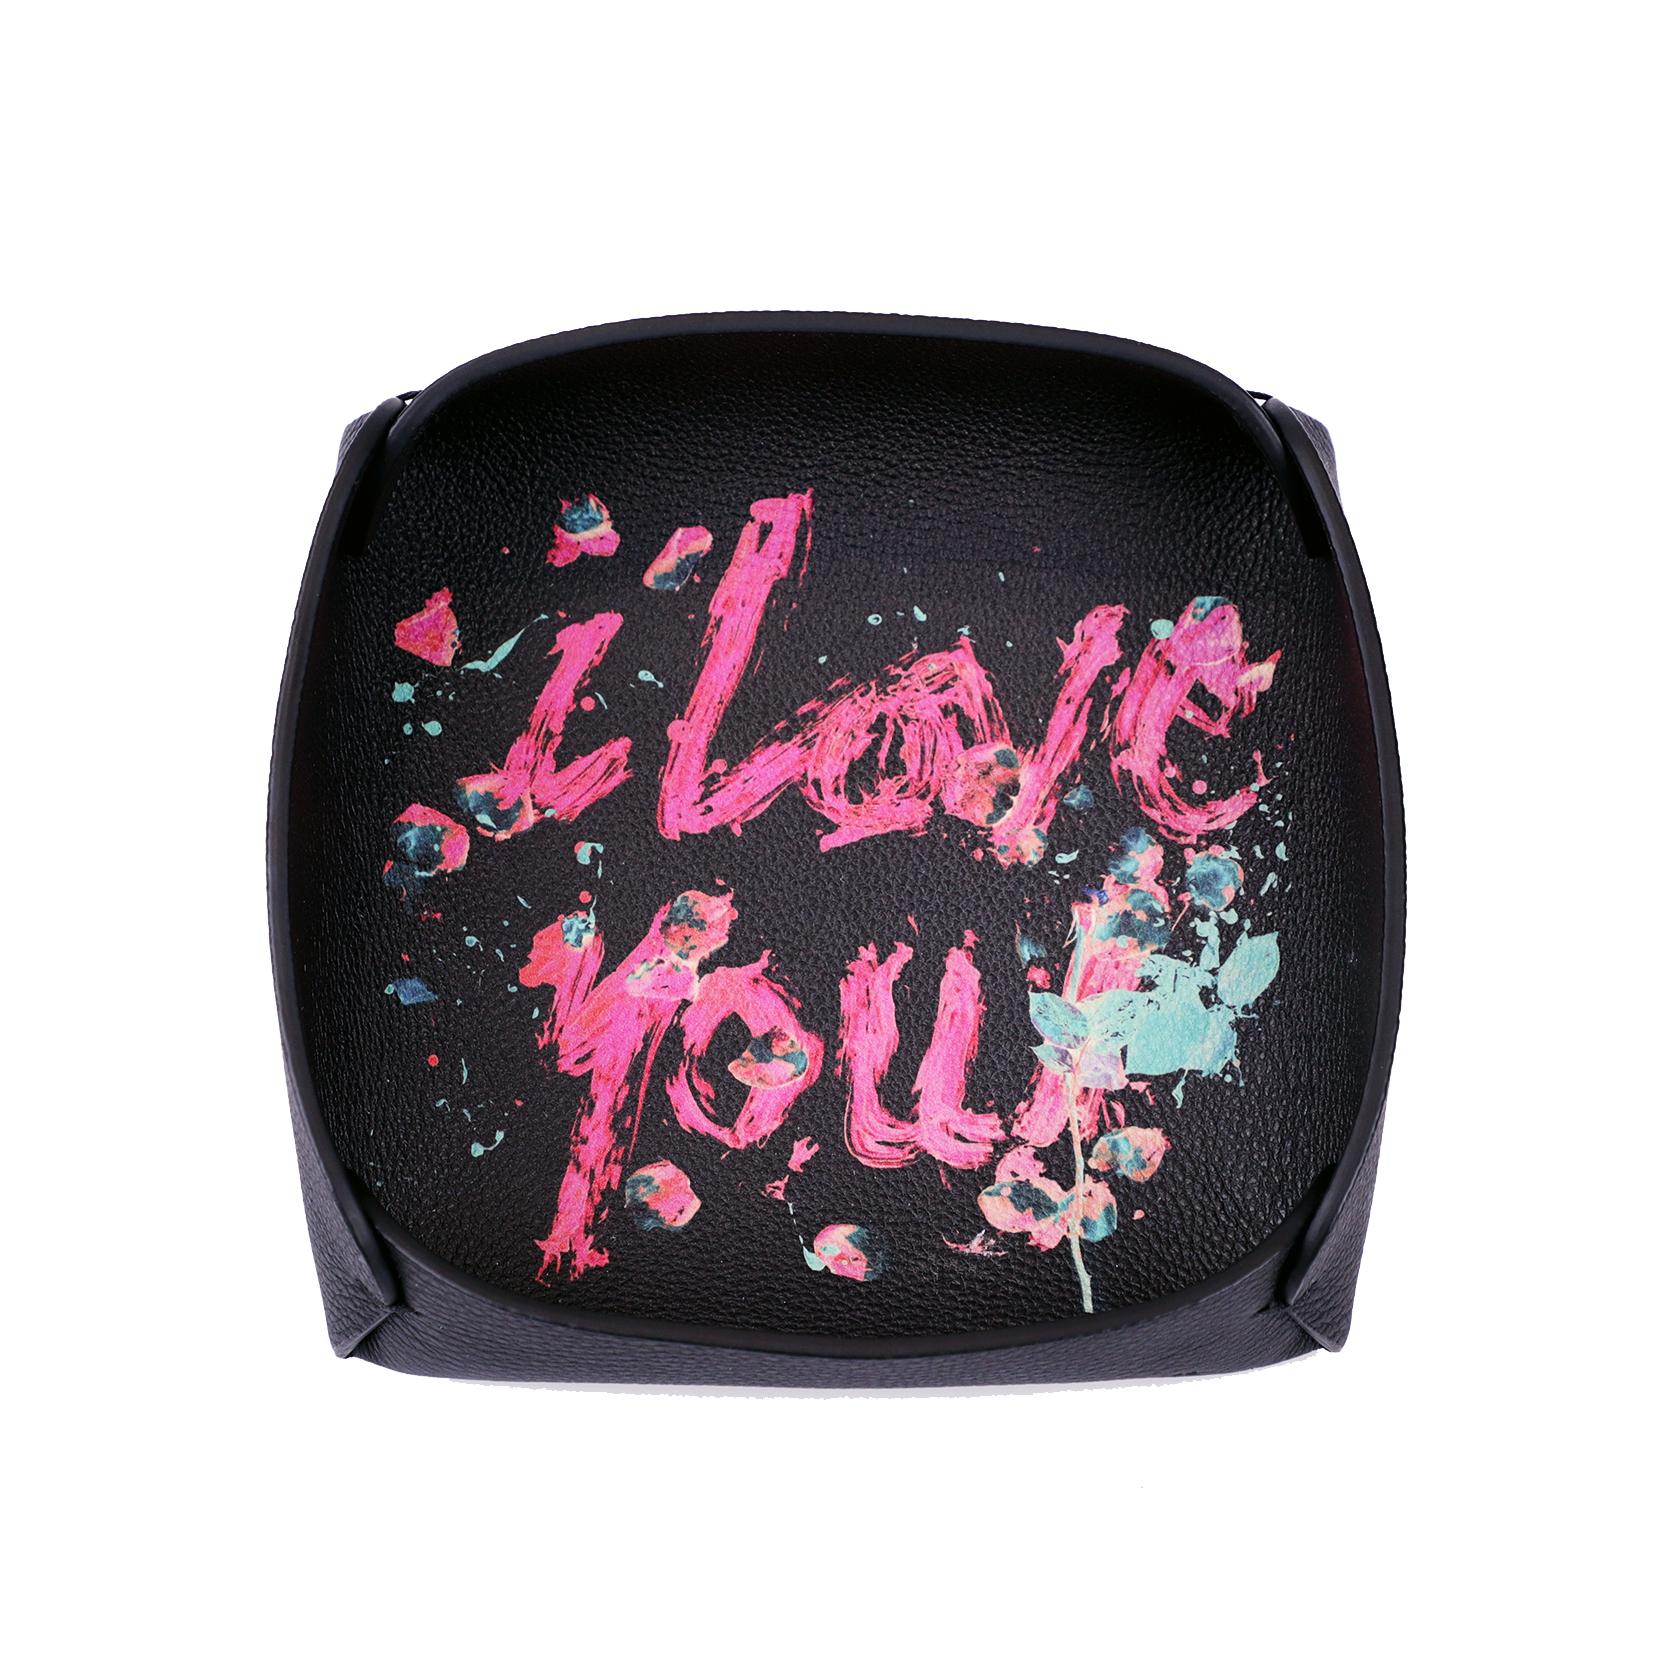 'I Love You' Art Leather Tray